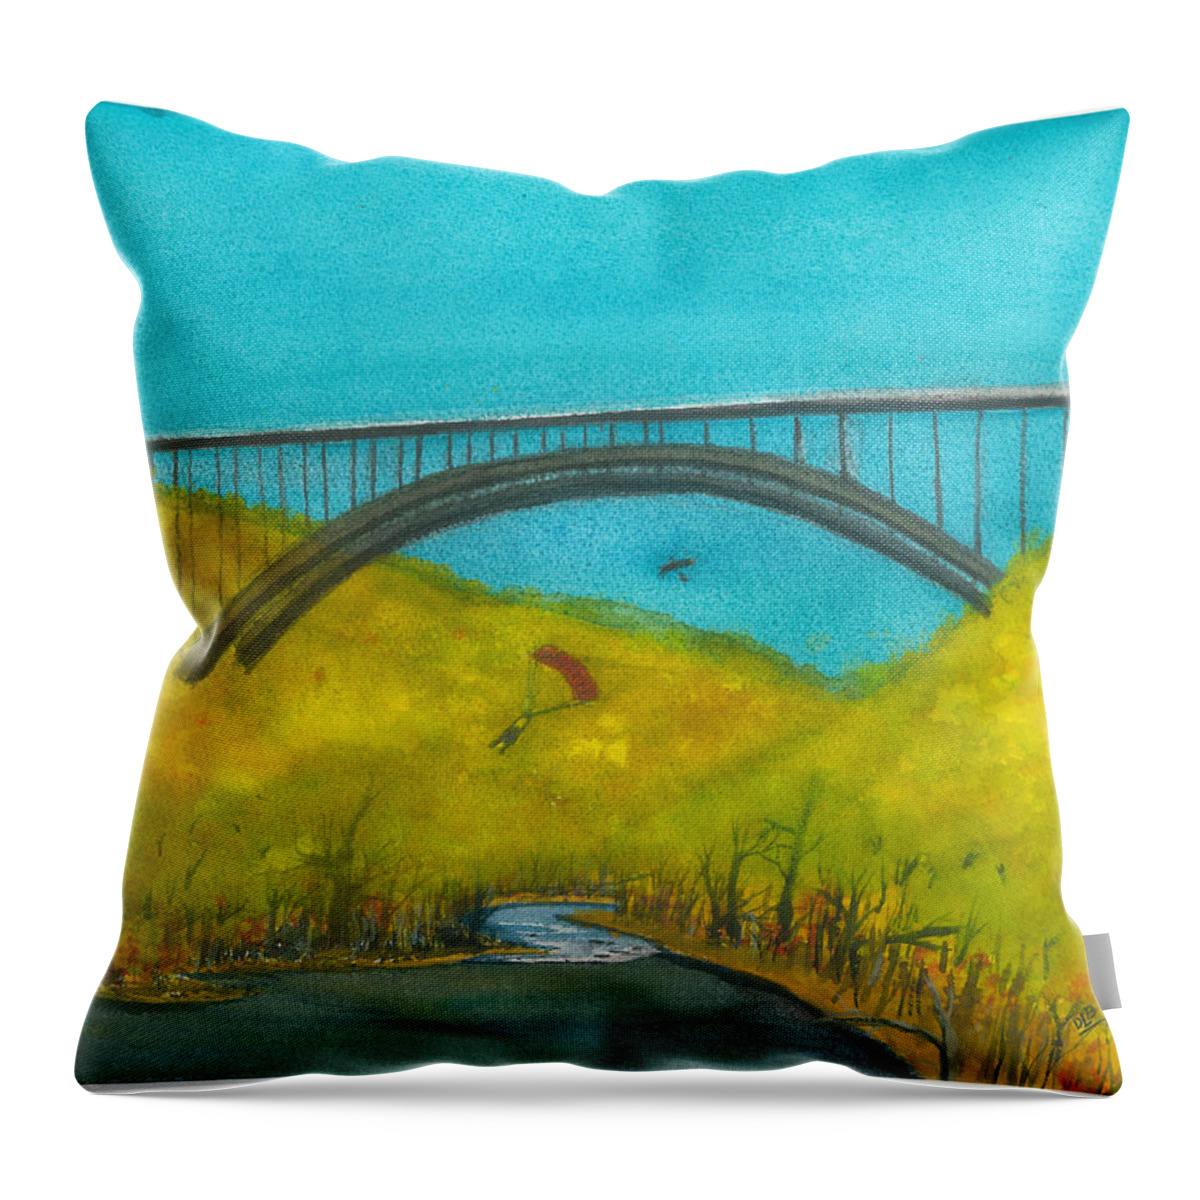 New River Gorge Throw Pillow featuring the painting New River Gorge Bridge on Bridge Day by David Bartsch